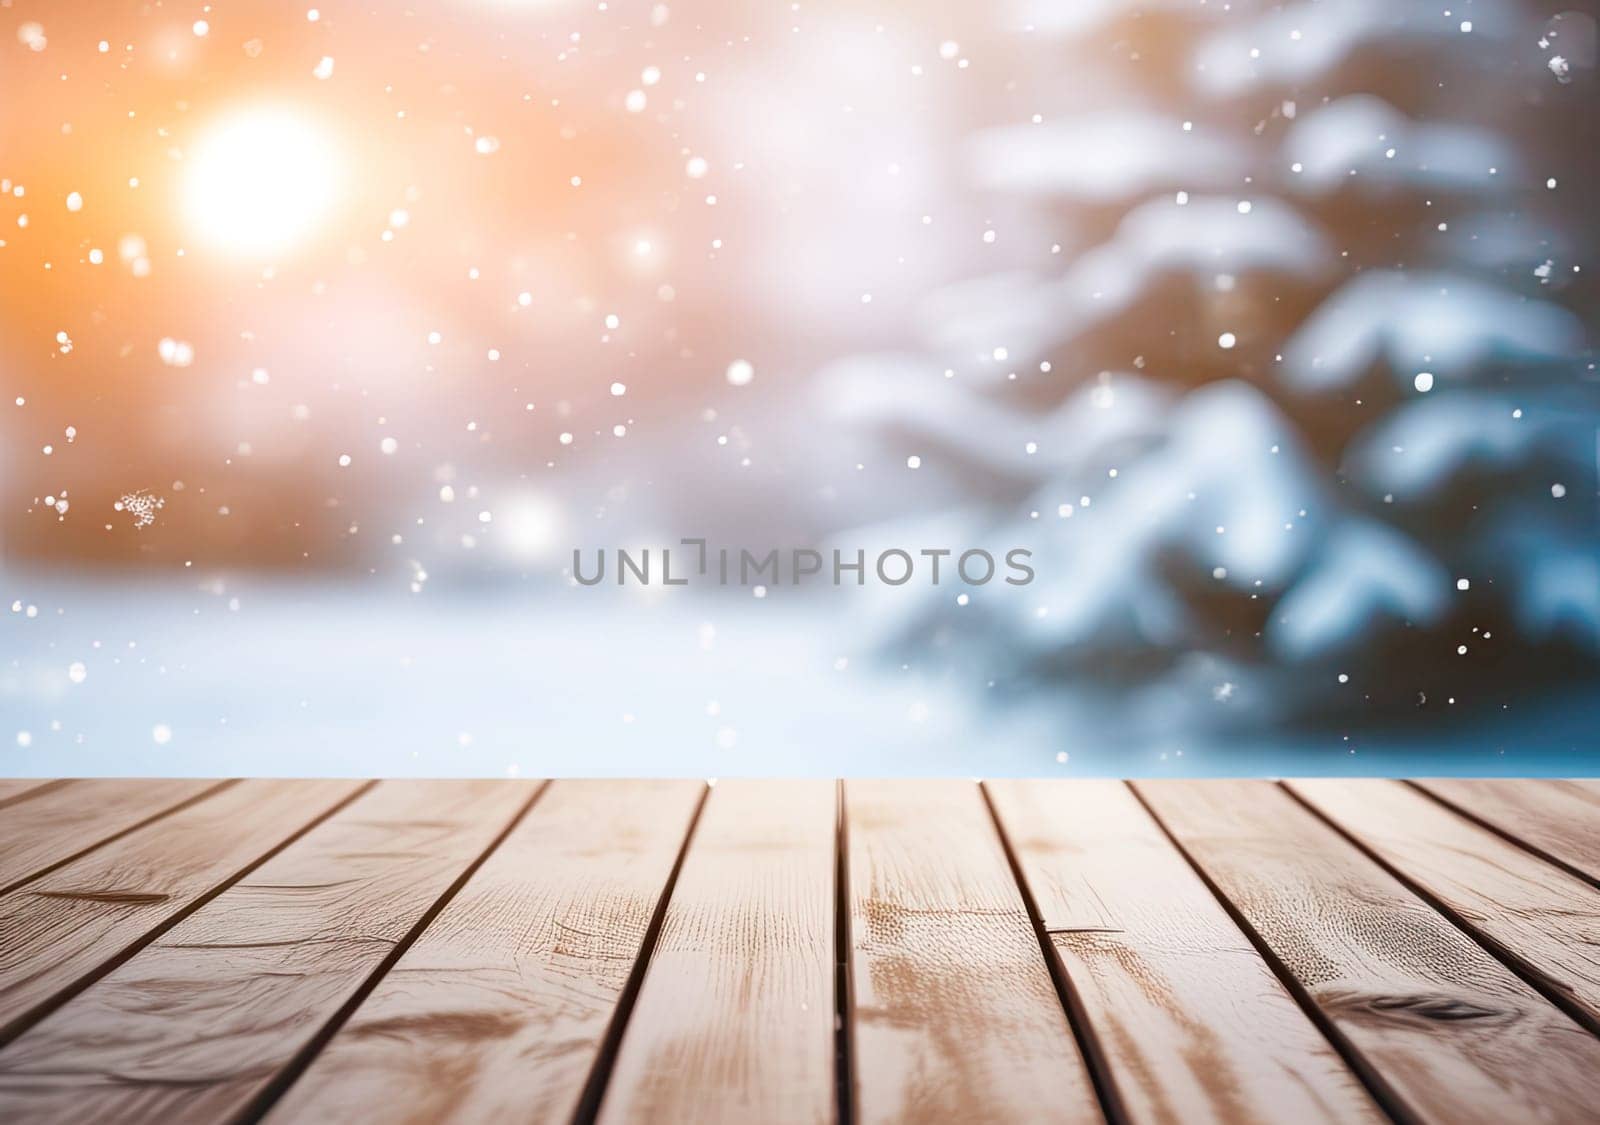  winter snowy blurred defocused background. empty wooden flooring. Flakes of snow fall and sparkle on light.